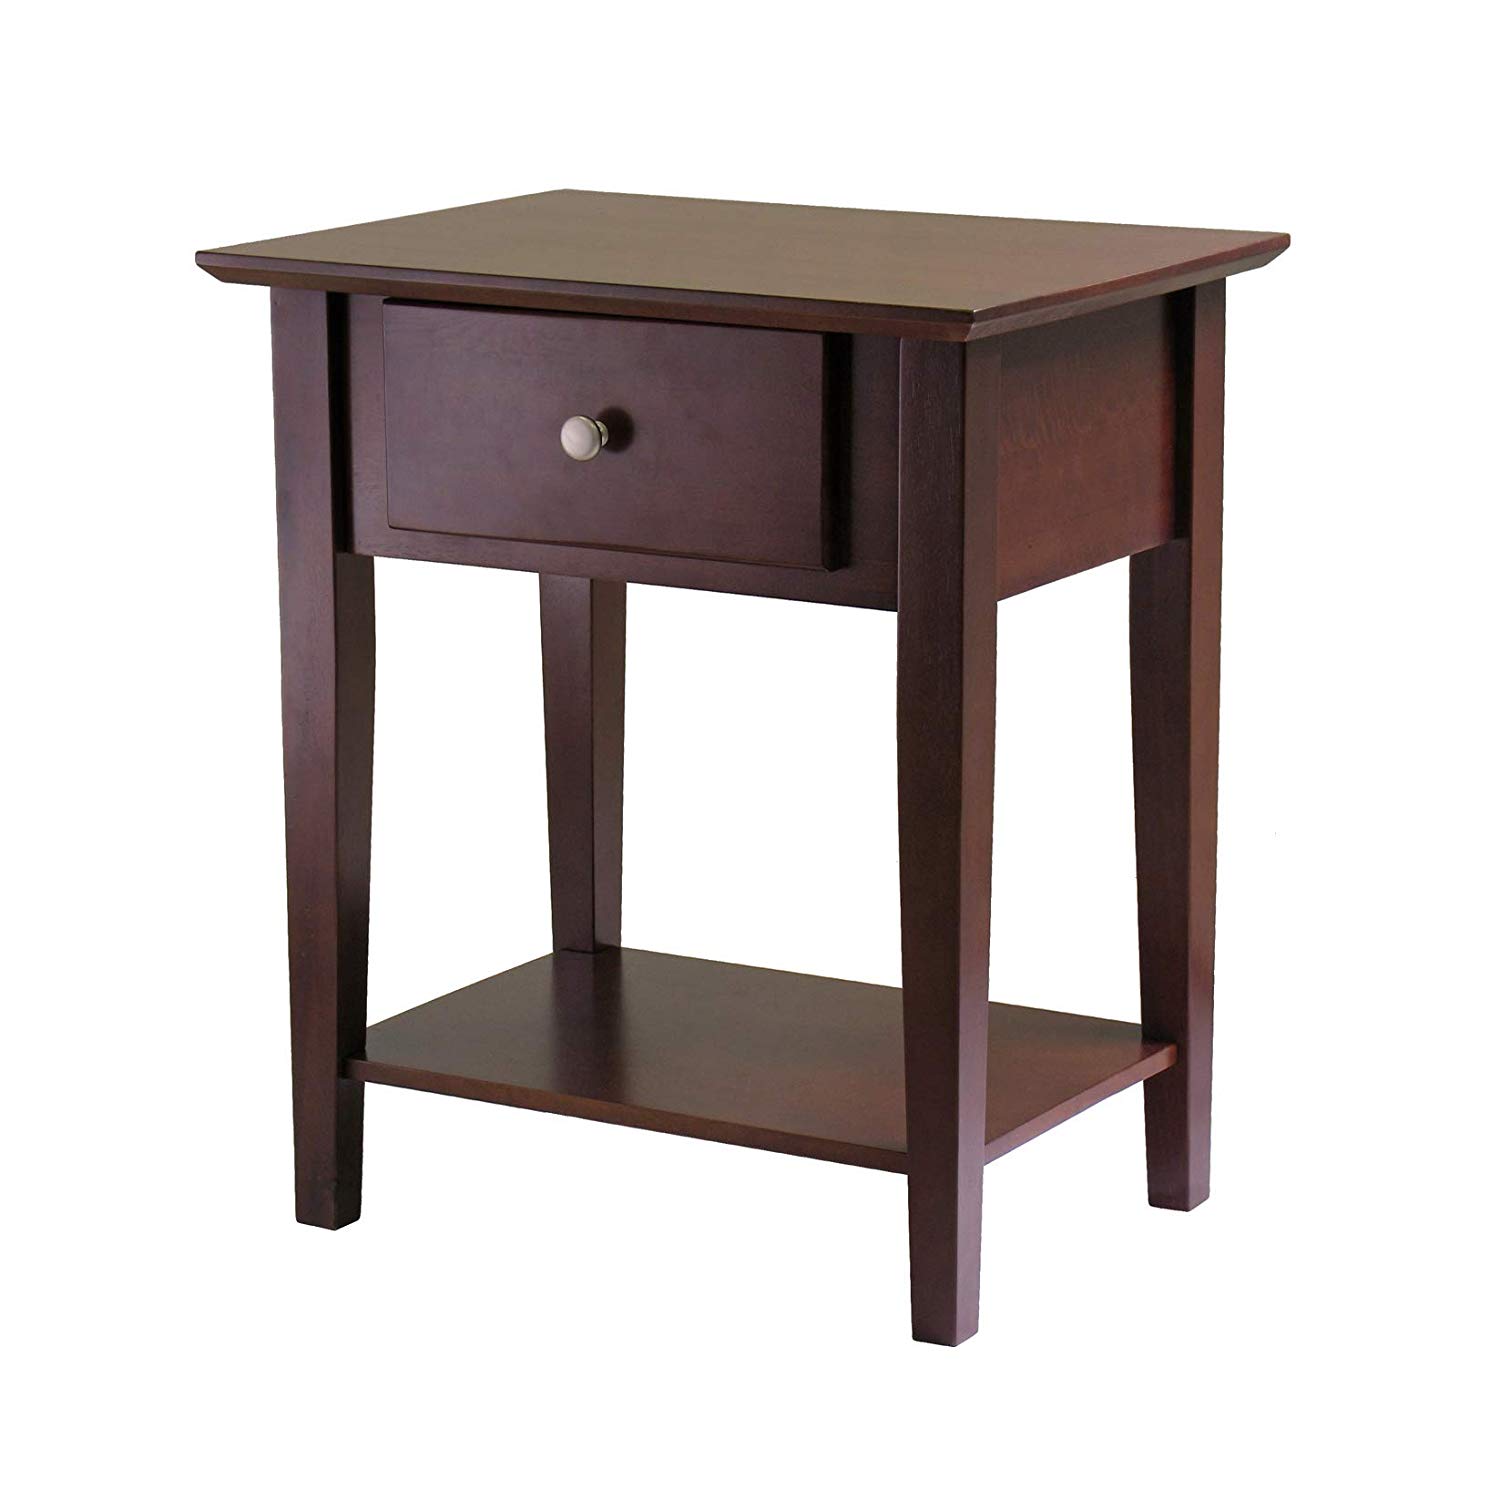 winsome wood shaker accent table antique walnut style kitchen dining turquoise counter height set with storage nate berkus marble target side bedroom end ideas metal coffee and